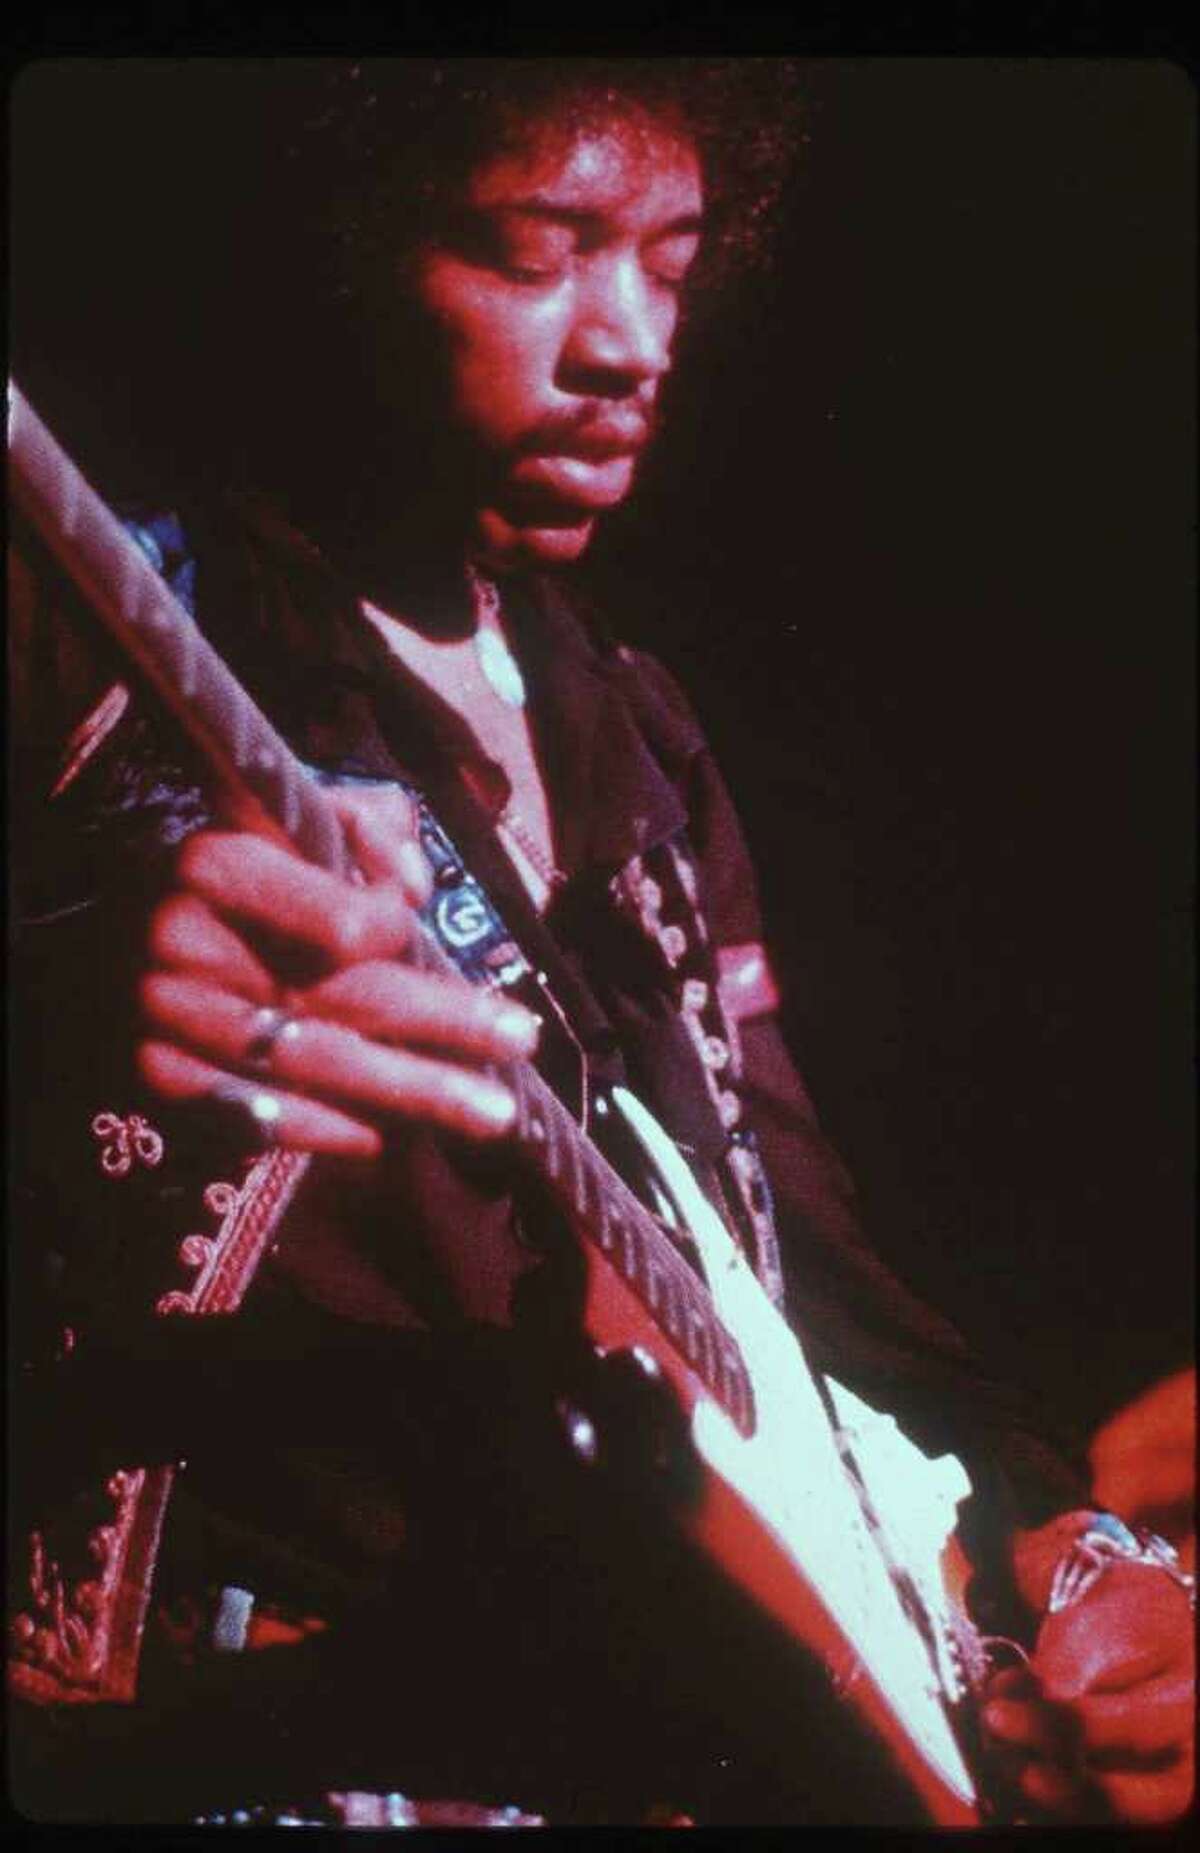 Guitar great Jimi Hendrix was born in Seattle and attended, but did not graduate from, Garfield High School.